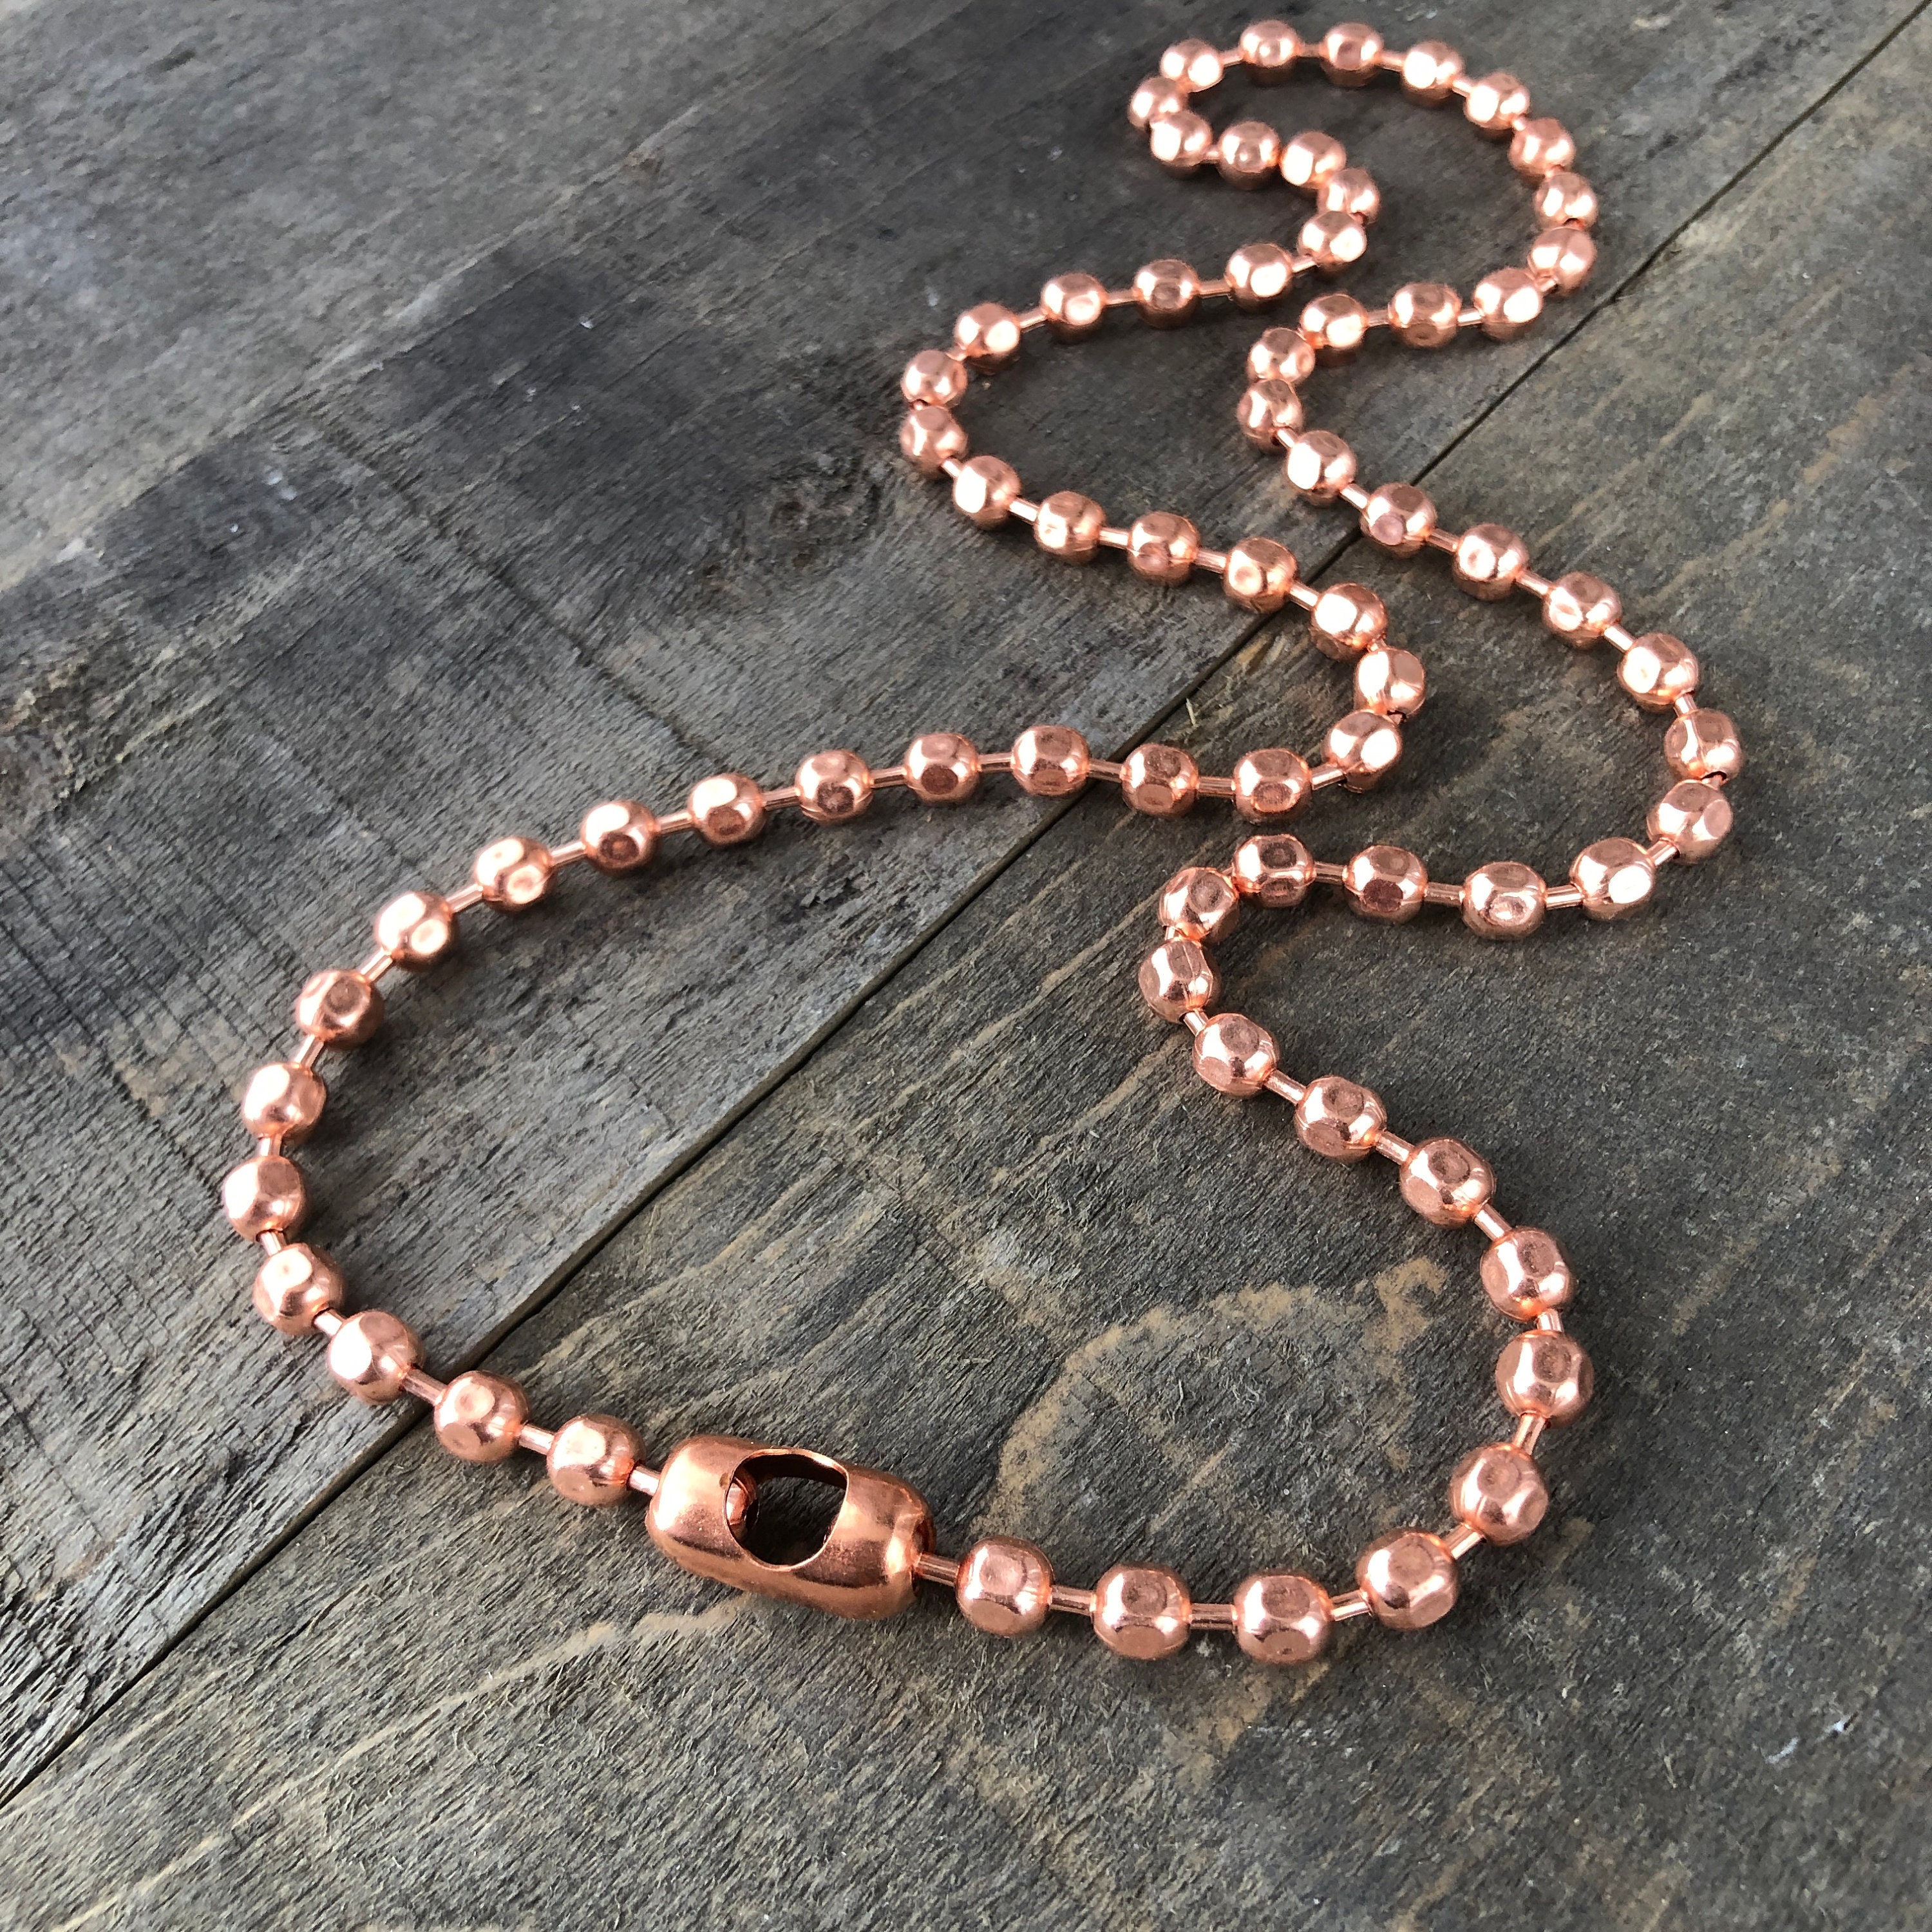 6mm Ball Chain Copper Necklace, Oversize Ballchain Genuine Copper Necklace  for Men, Strong Copper Chain, 7th Anniversary Gift 